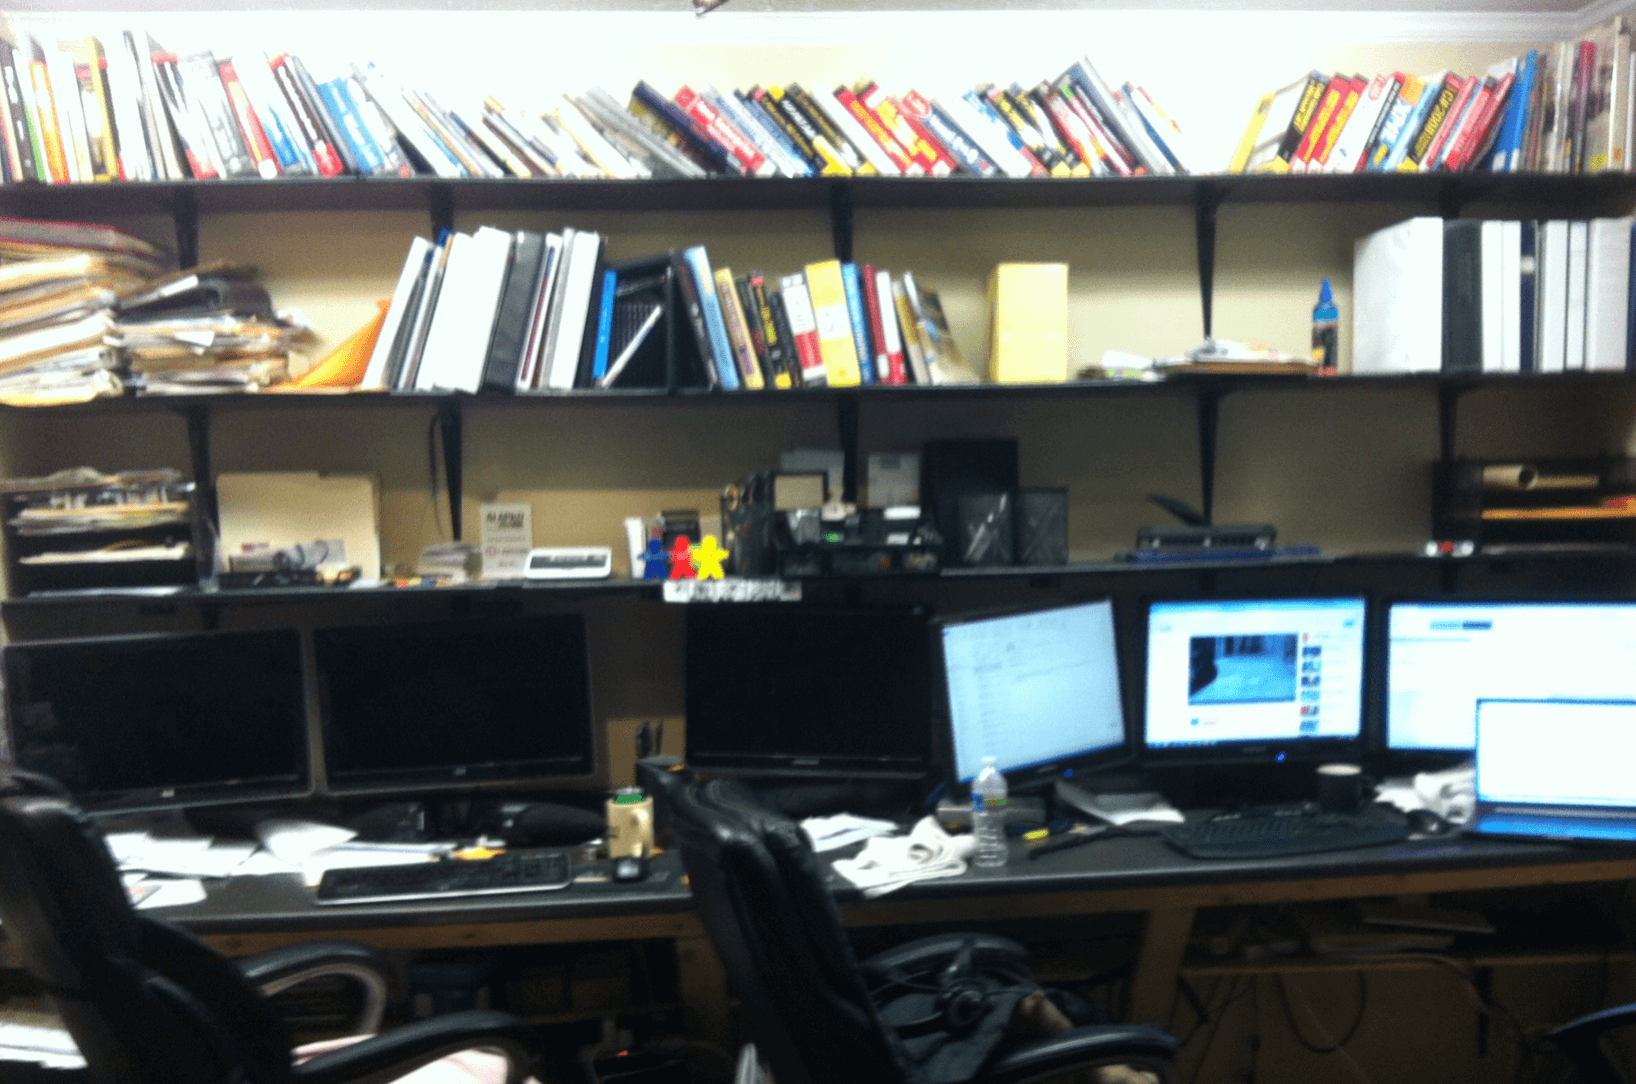 A workstation in the basement.